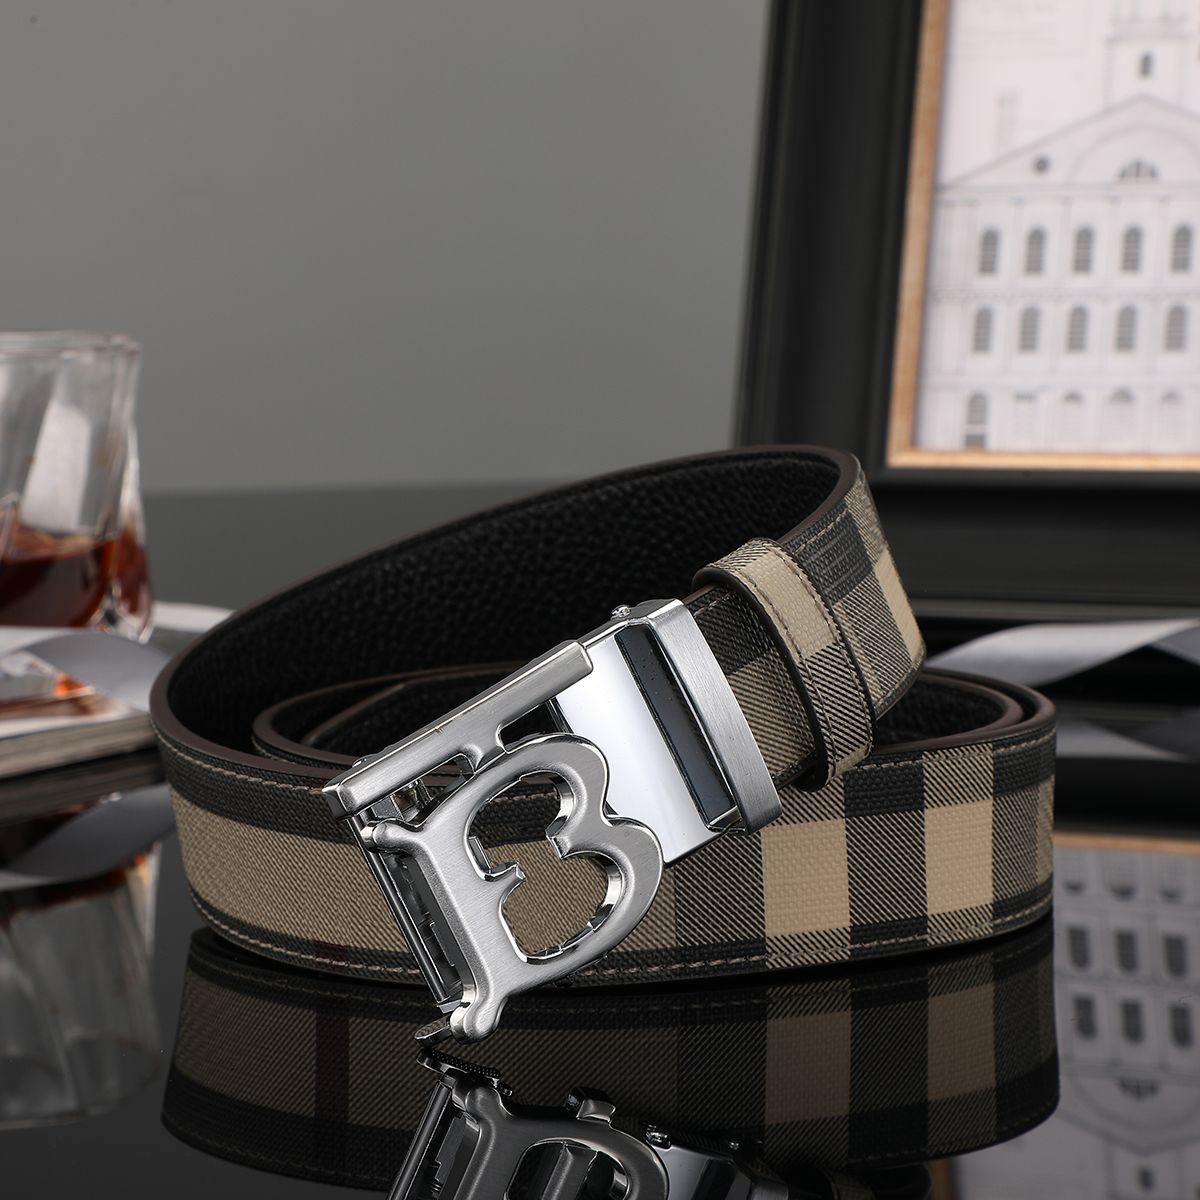 Designer Mens Belt With Automatic Stripe Letter Buckle Luxury Classic Gold  And Silver Black Buckles From Lululemens001, $9.33